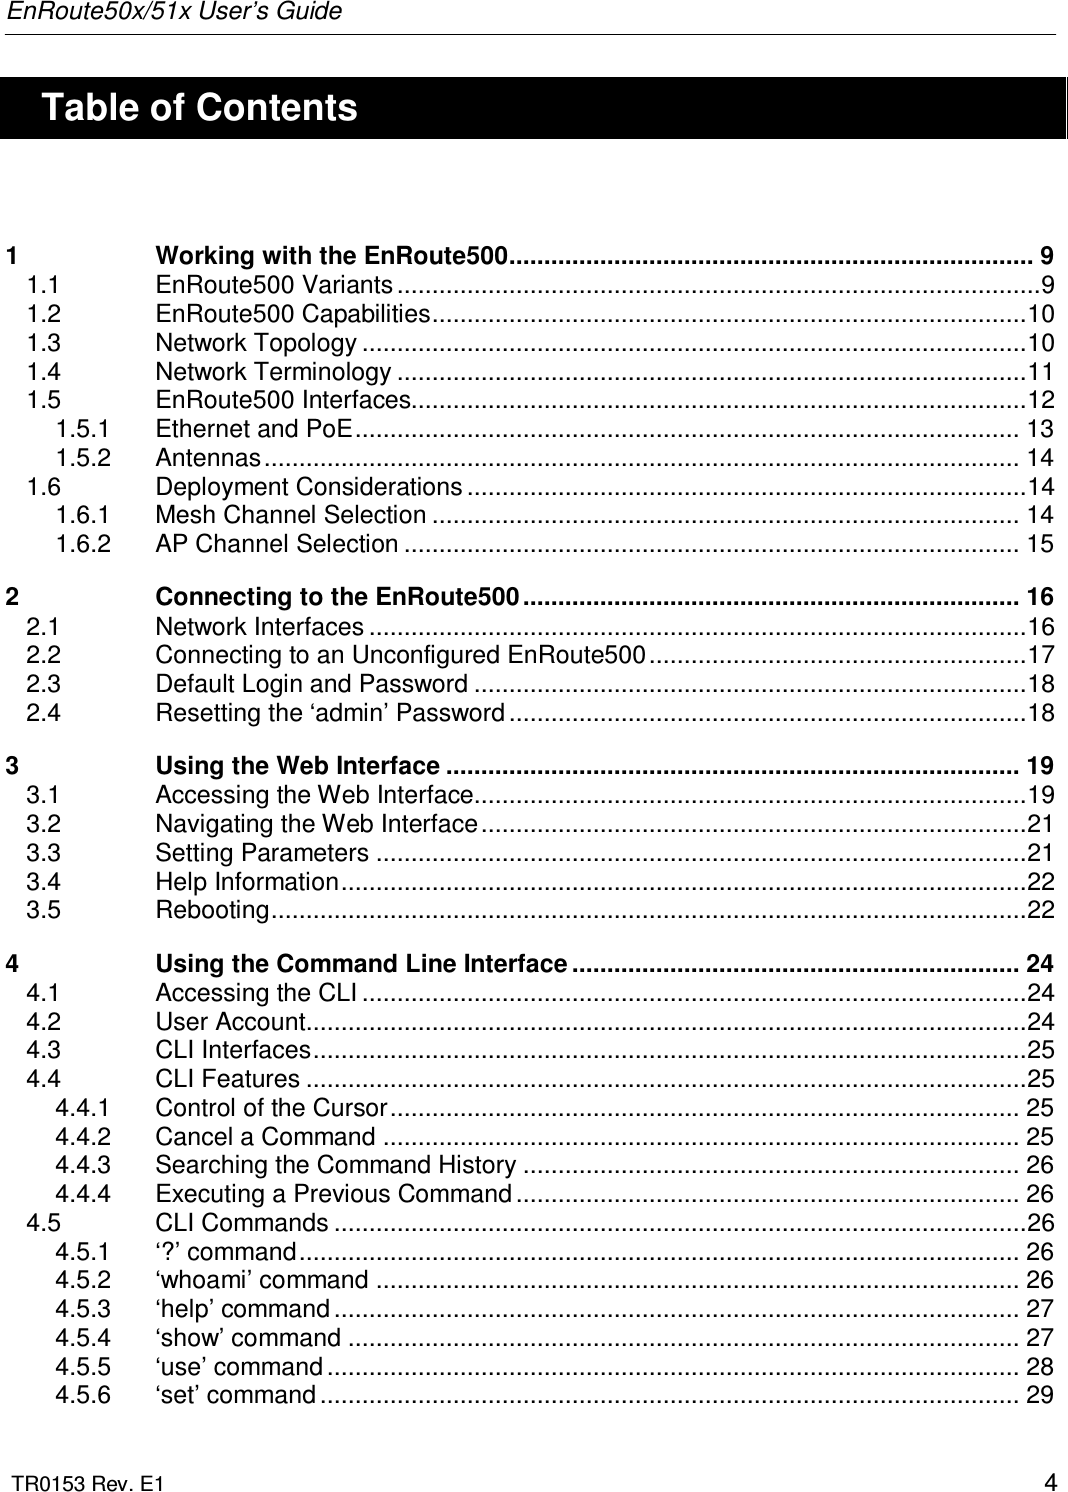 EnRoute50x/51x User’s Guide  TR0153 Rev. E1    4    Table of Contents  1 Working with the EnRoute500........................................................................... 9 1.1 EnRoute500 Variants ............................................................................................9 1.2 EnRoute500 Capabilities.....................................................................................10 1.3 Network Topology ...............................................................................................10 1.4 Network Terminology ..........................................................................................11 1.5 EnRoute500 Interfaces........................................................................................12 1.5.1 Ethernet and PoE............................................................................................... 13 1.5.2 Antennas............................................................................................................ 14 1.6 Deployment Considerations ................................................................................14 1.6.1 Mesh Channel Selection .................................................................................... 14 1.6.2 AP Channel Selection ........................................................................................ 15 2 Connecting to the EnRoute500 ....................................................................... 16 2.1 Network Interfaces ..............................................................................................16 2.2 Connecting to an Unconfigured EnRoute500......................................................17 2.3 Default Login and Password ...............................................................................18 2.4 Resetting the ‘admin’ Password ..........................................................................18 3 Using the Web Interface .................................................................................. 19 3.1 Accessing the Web Interface...............................................................................19 3.2 Navigating the Web Interface..............................................................................21 3.3 Setting Parameters .............................................................................................21 3.4 Help Information..................................................................................................22 3.5 Rebooting............................................................................................................22 4 Using the Command Line Interface ................................................................ 24 4.1 Accessing the CLI ...............................................................................................24 4.2 User Account.......................................................................................................24 4.3 CLI Interfaces......................................................................................................25 4.4 CLI Features .......................................................................................................25 4.4.1 Control of the Cursor.......................................................................................... 25 4.4.2 Cancel a Command ........................................................................................... 25 4.4.3 Searching the Command History ....................................................................... 26 4.4.4 Executing a Previous Command ........................................................................ 26 4.5 CLI Commands ...................................................................................................26 4.5.1 ‘?’ command....................................................................................................... 26 4.5.2 ‘whoami’ command ............................................................................................ 26 4.5.3 ‘help’ command .................................................................................................. 27 4.5.4 ‘show’ command ................................................................................................ 27 4.5.5 ‘use’ command ................................................................................................... 28 4.5.6 ‘set’ command .................................................................................................... 29 